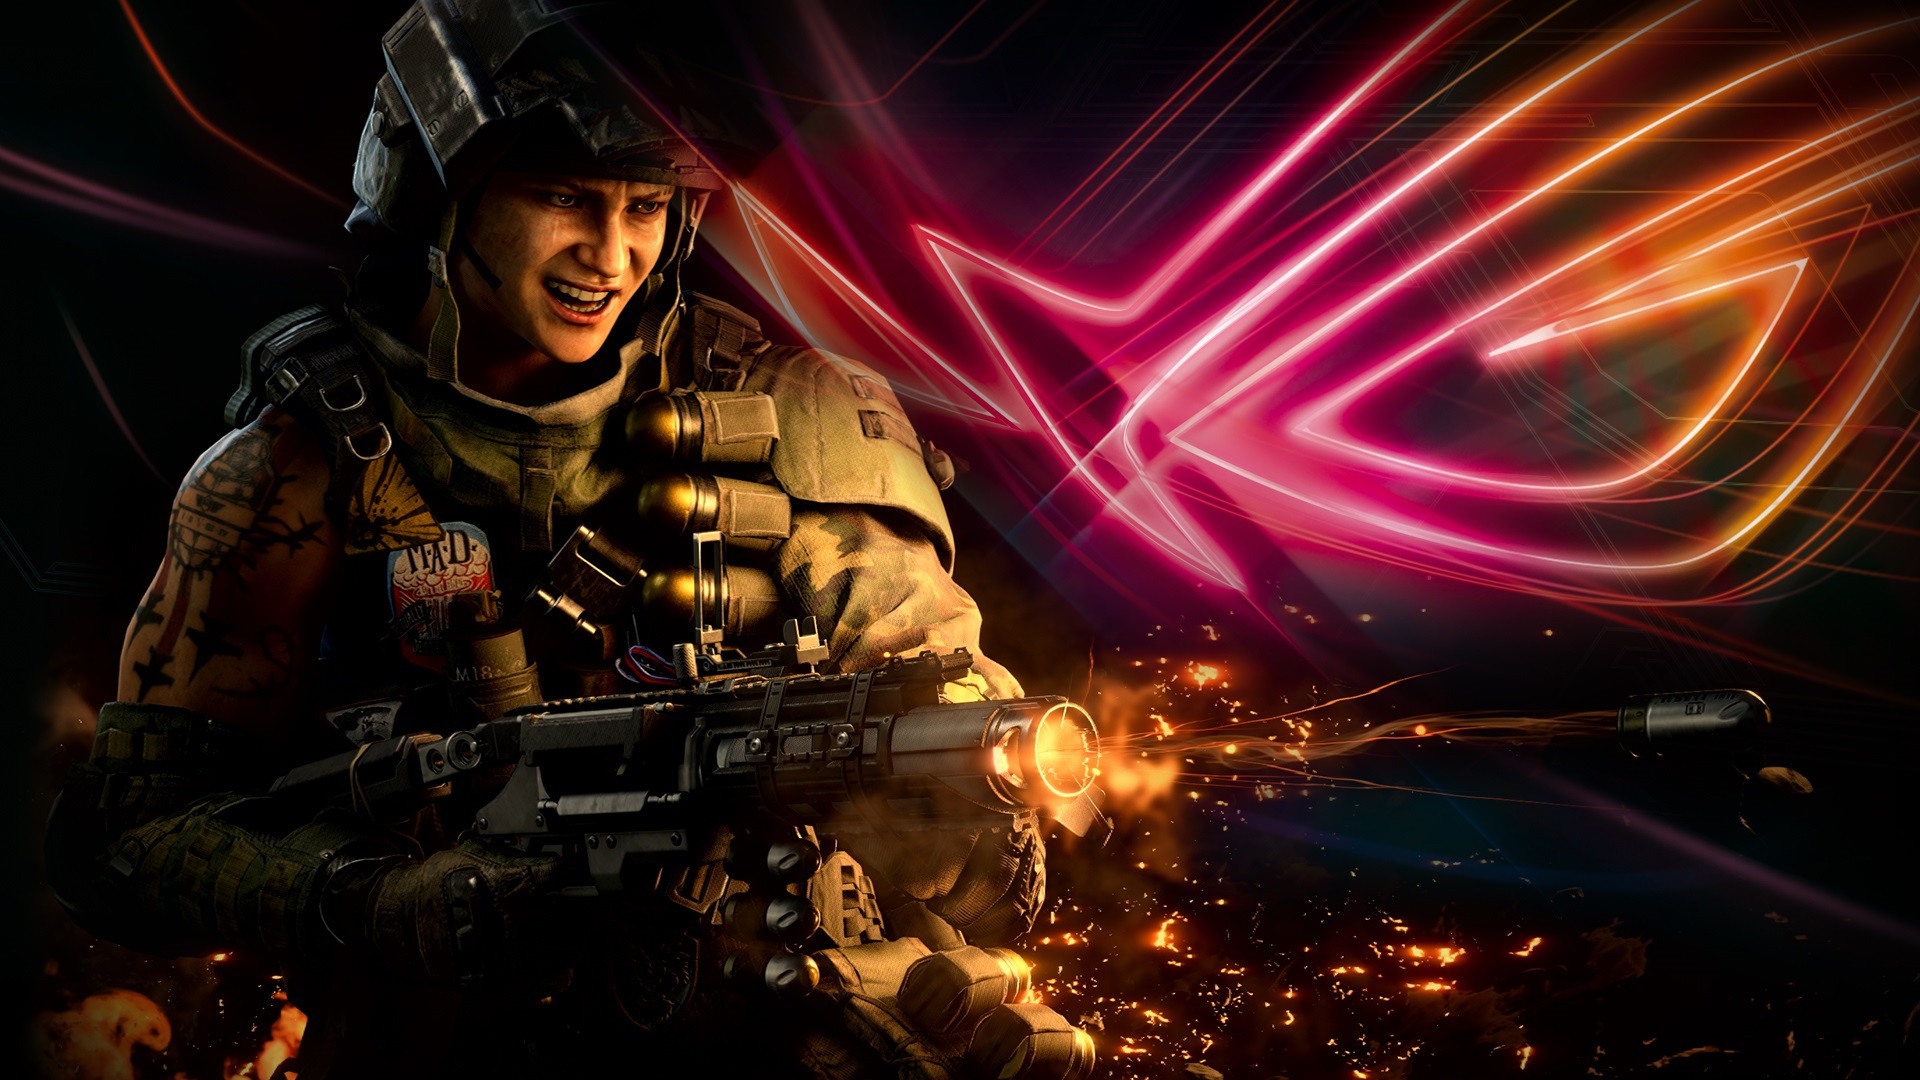 Call Of Duty Black Ops 4 Wants To Prove Its PC Dedication With An Asus